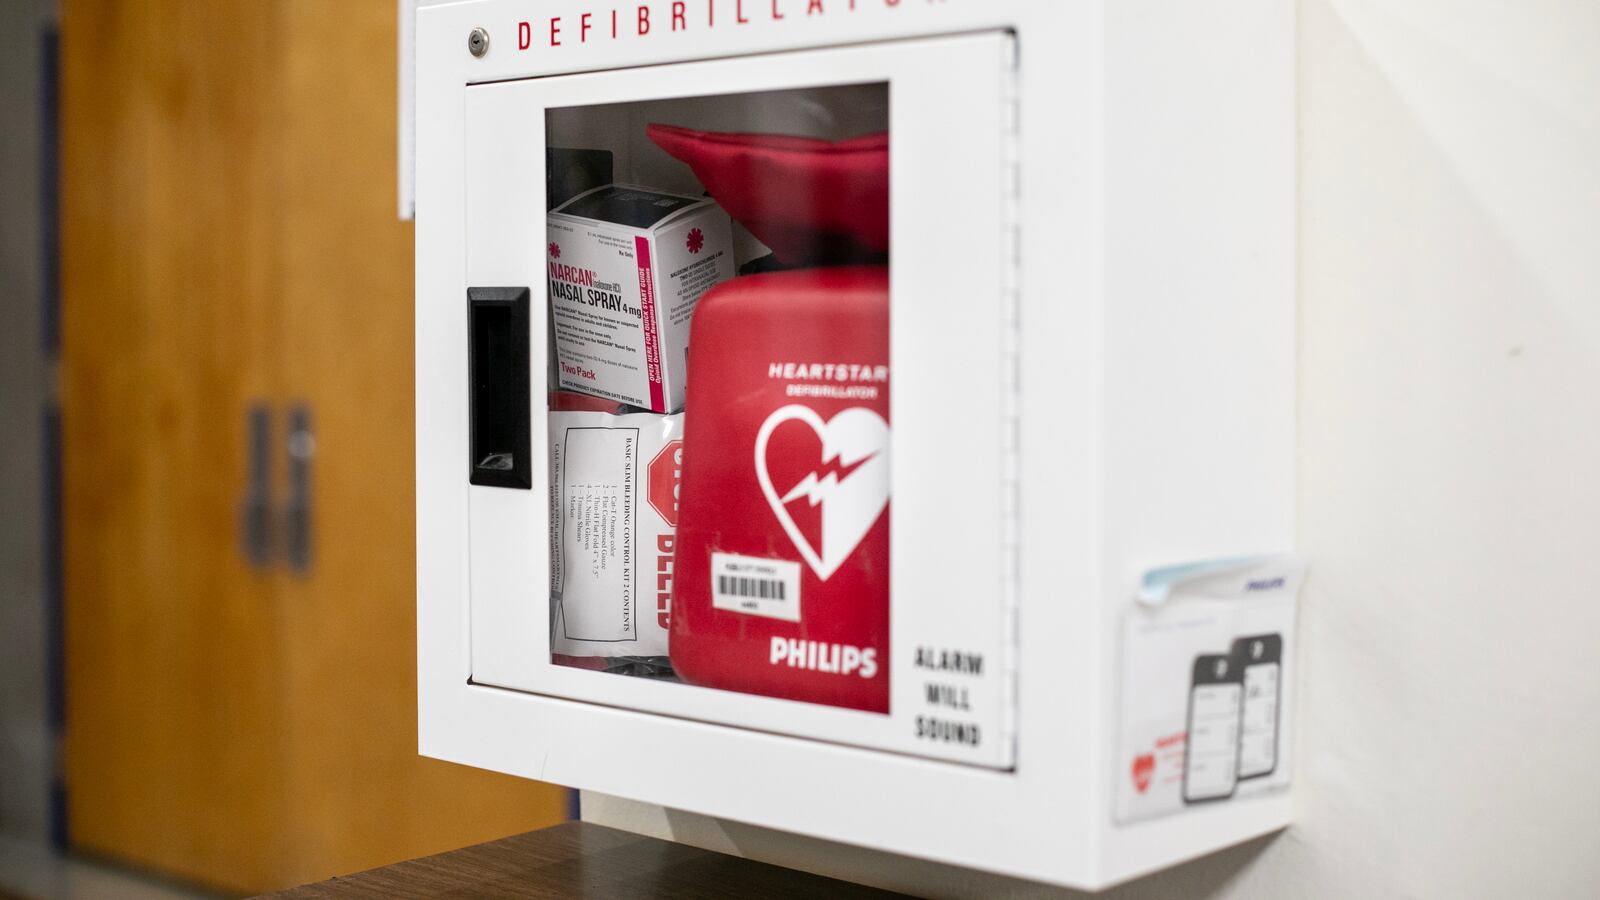 An emergency box mounted in the hallway of a building, containing a defibrillator and medications.